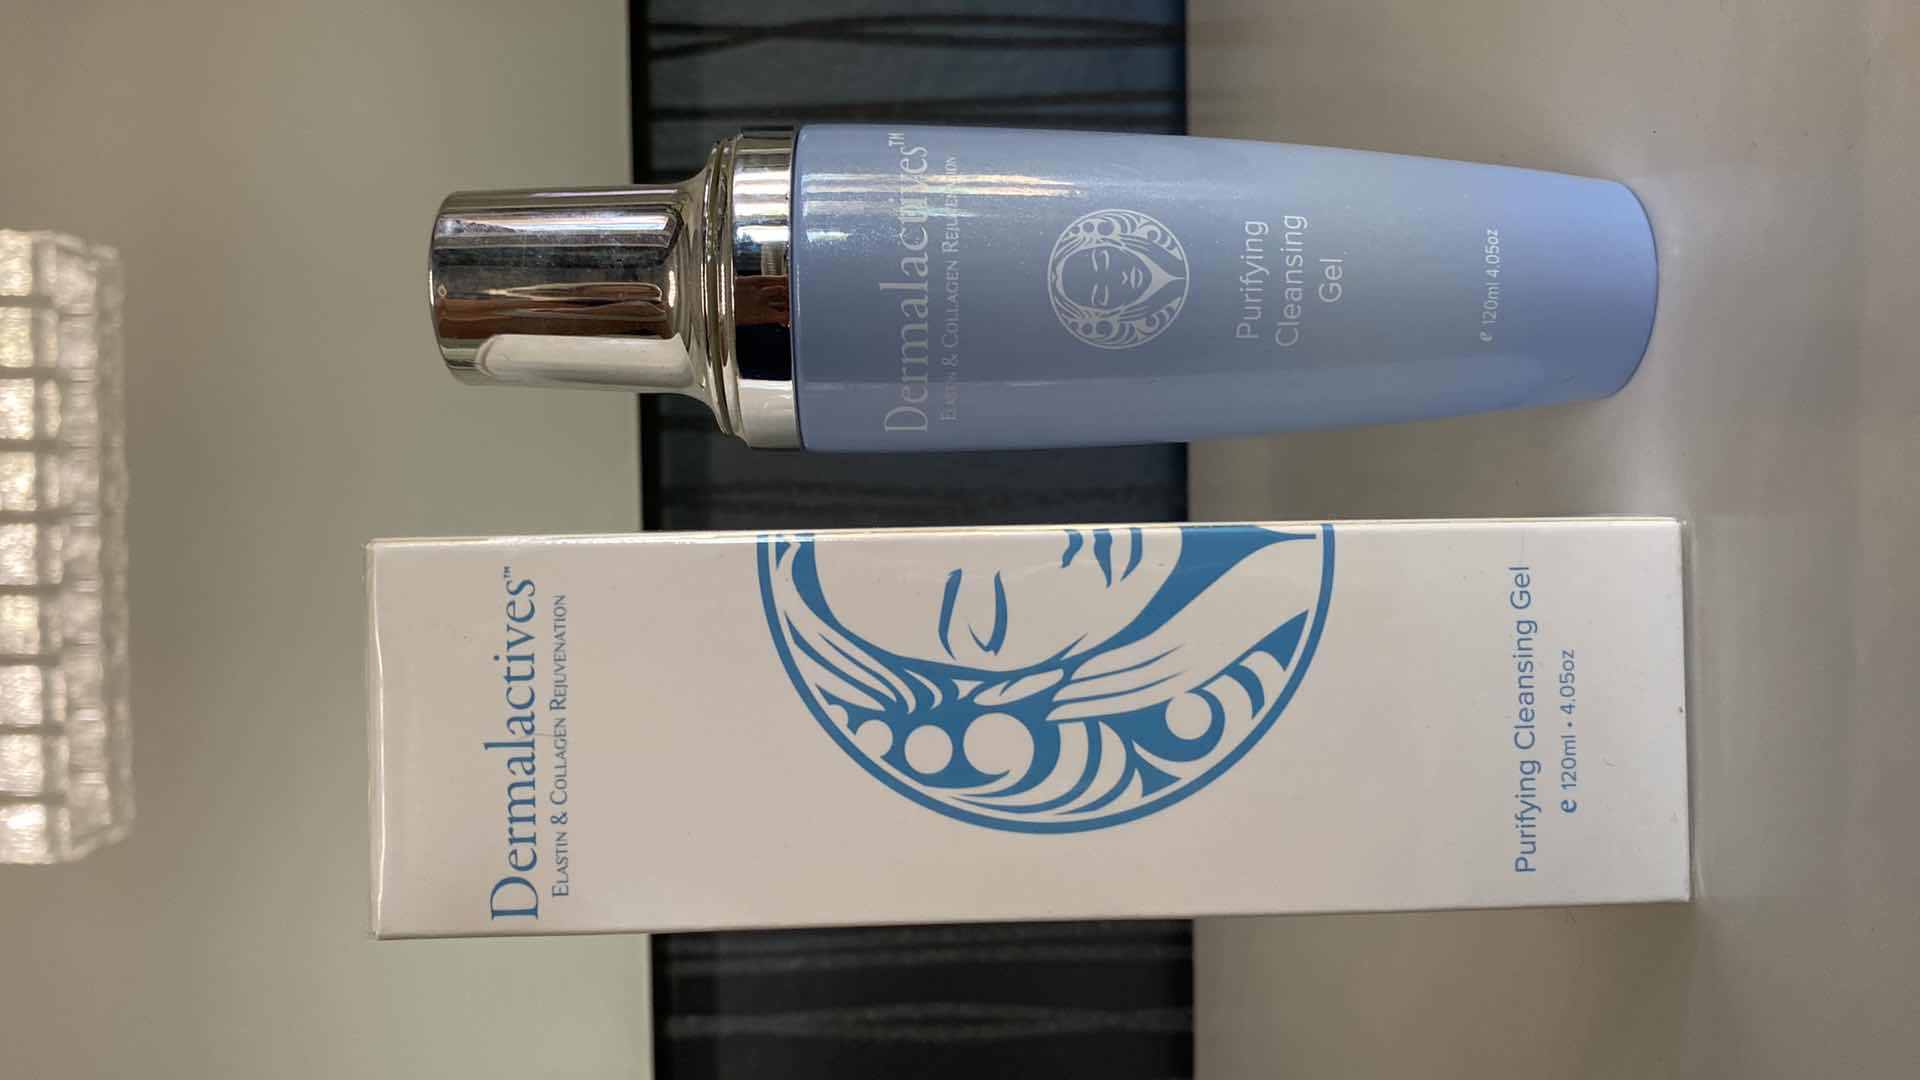 Photo 2 of NEW DERMALATIVES PURIFYING CLEANSING GEL -PURIFIES THE SKIN BY LIFTING AND REMOVING MAKE-UP, OIL BASED DEBRIS AND IMPURITIES